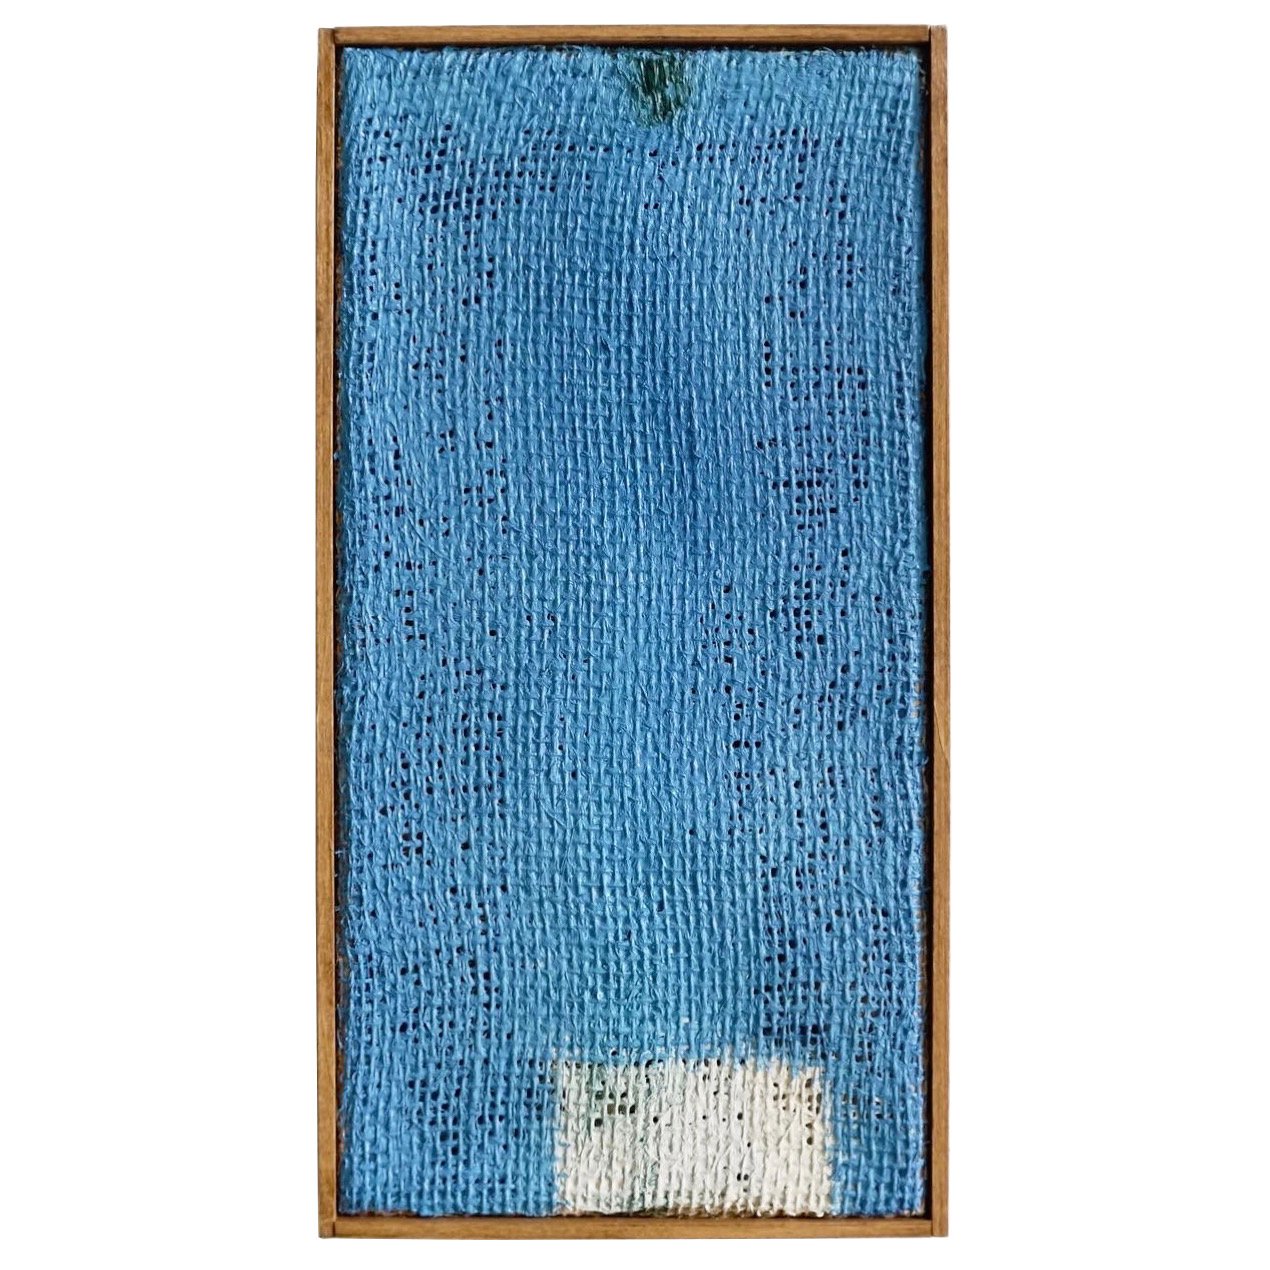 Untitled | oil and acrylic on jute | 30 x 15 cm | 2022